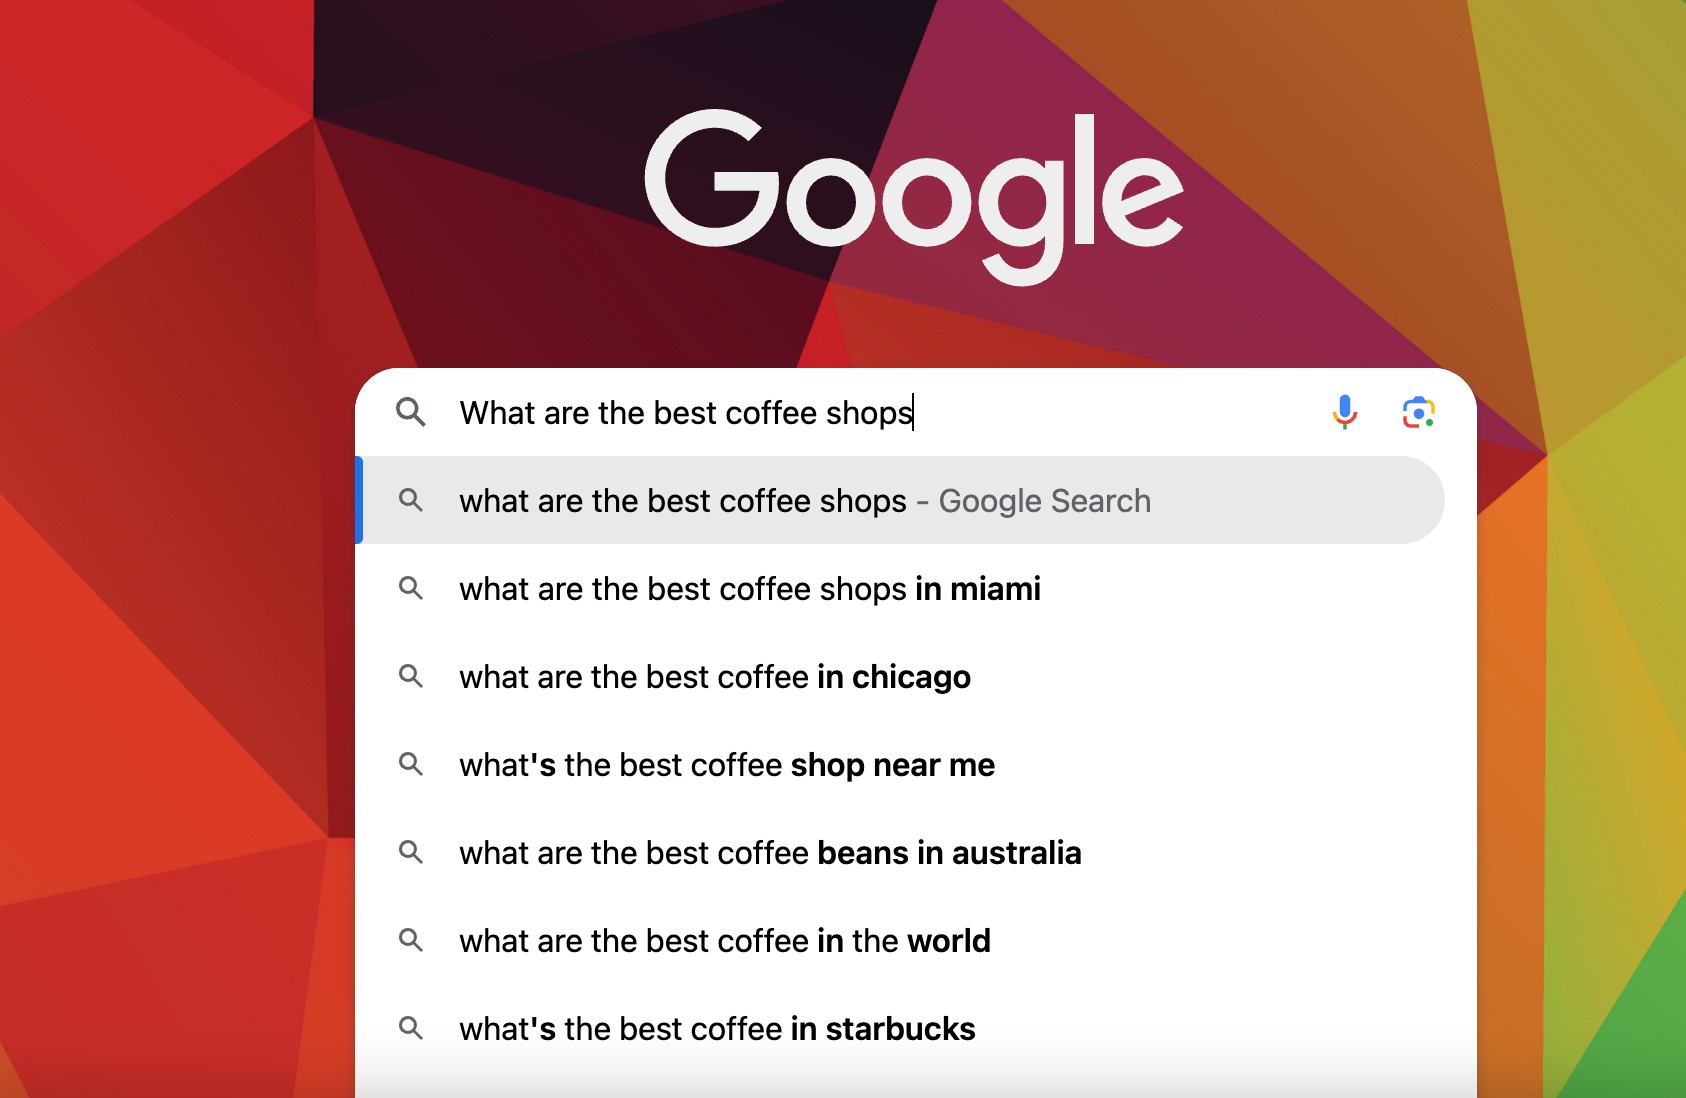 Google search to find keywords for voice search optimization